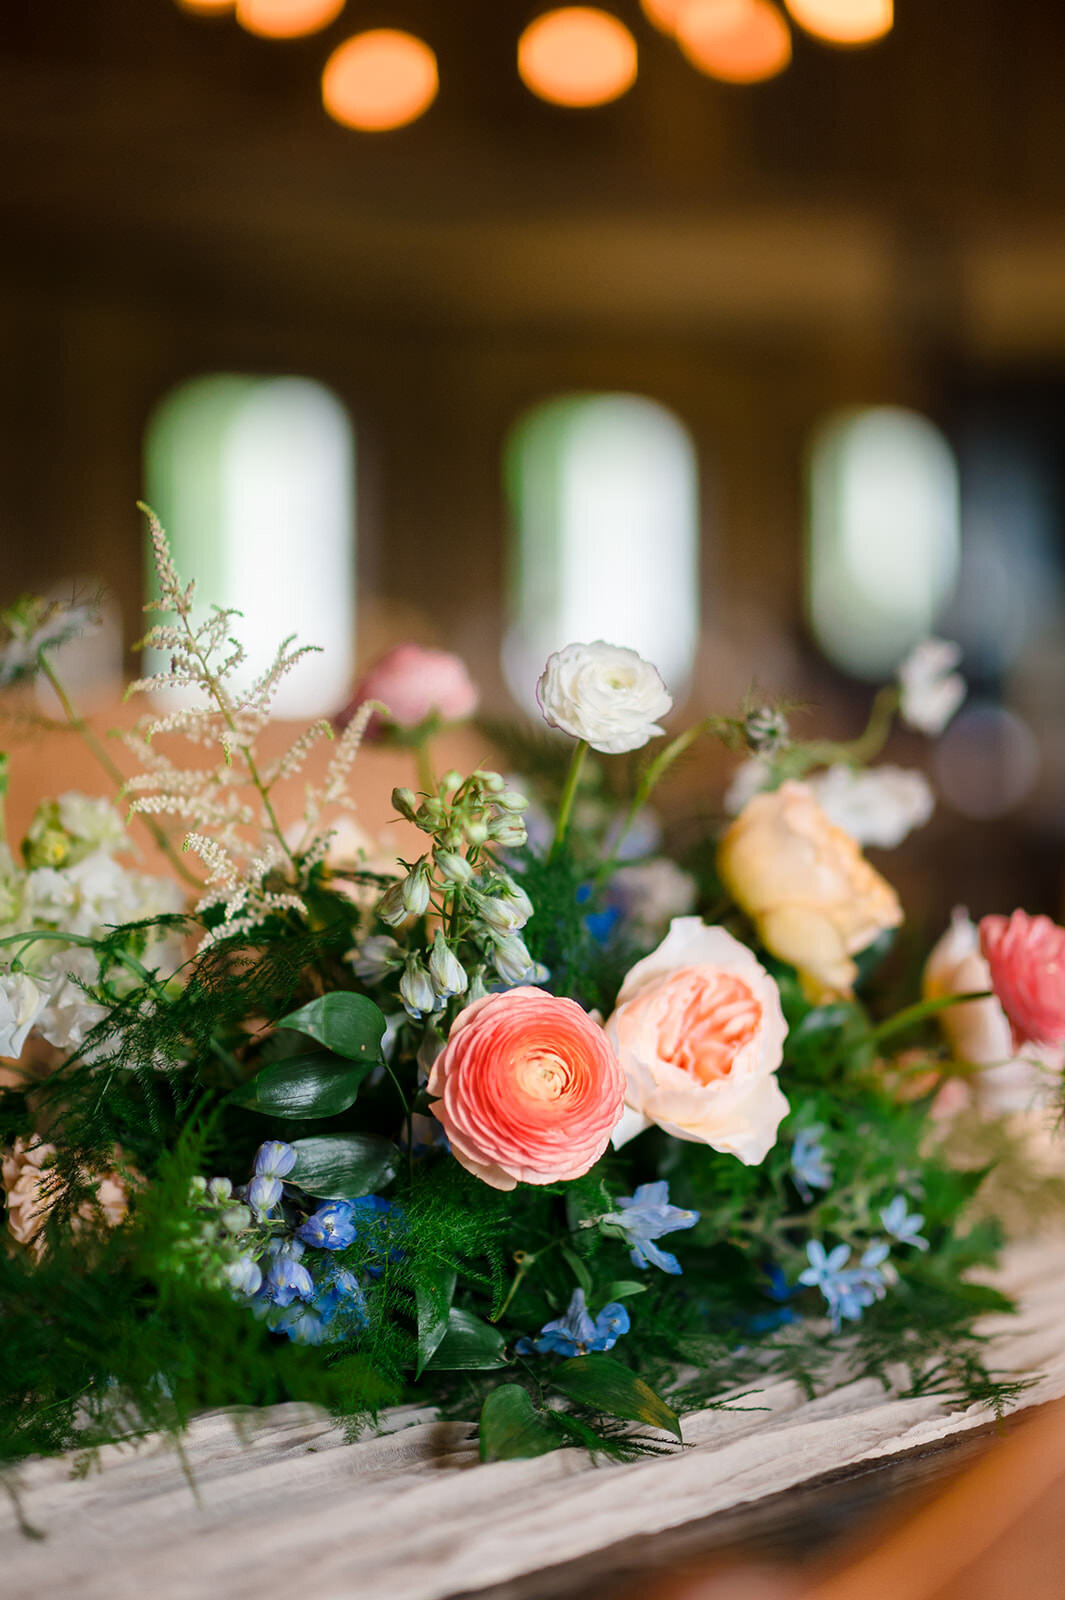 A close-up of a rustic chic floral arrangement on a wooden table, featuring pastel roses, white blossoms, and blue accents